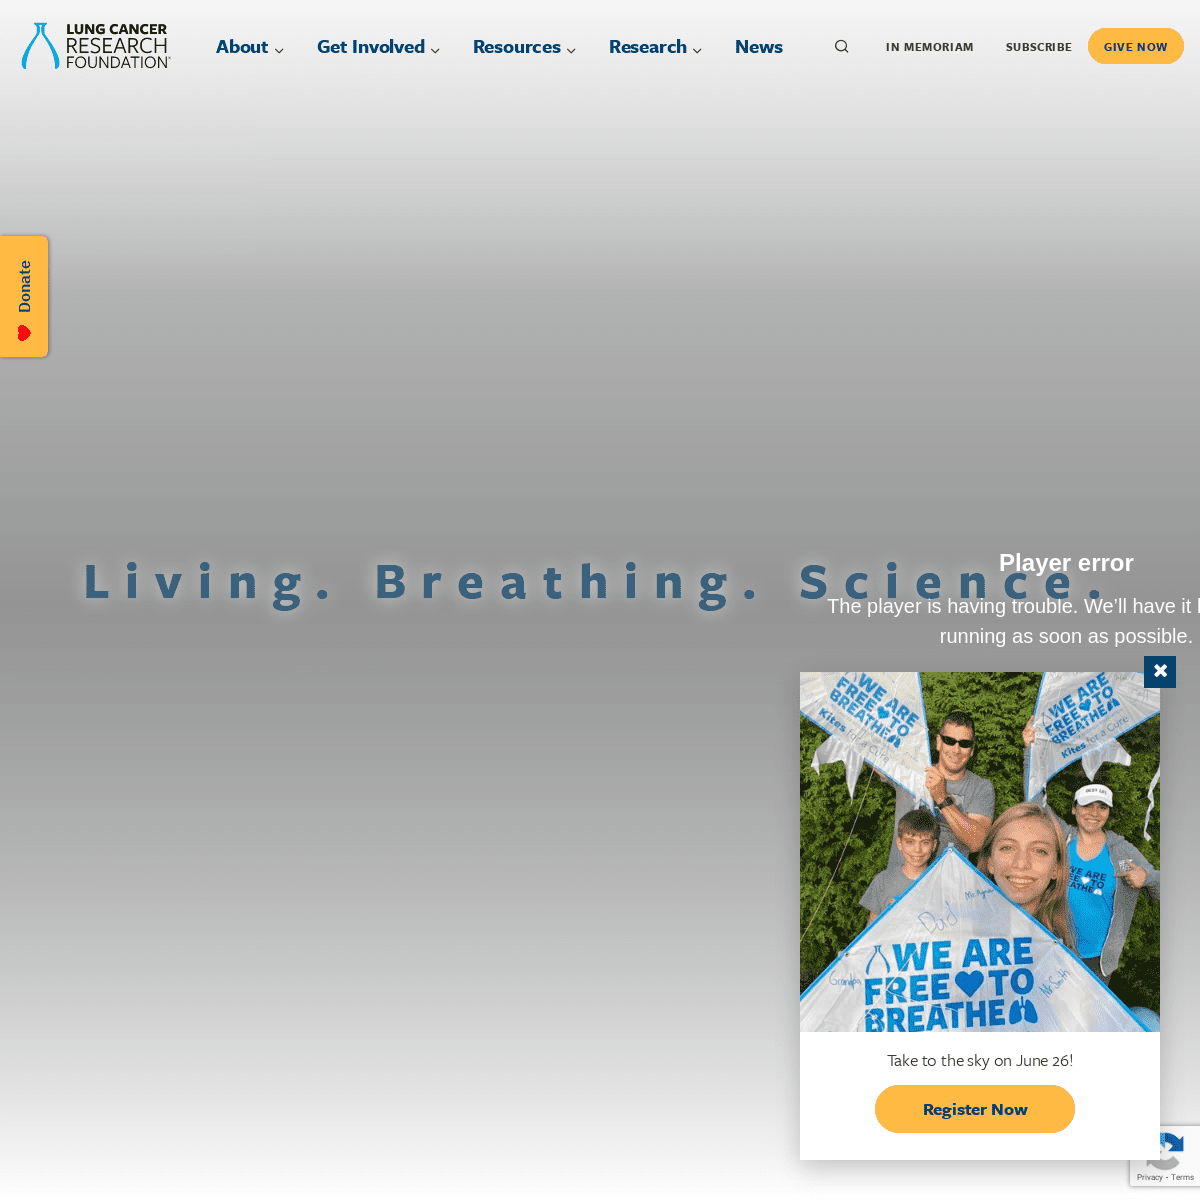 A complete backup of https://lungcancerresearchfoundation.org